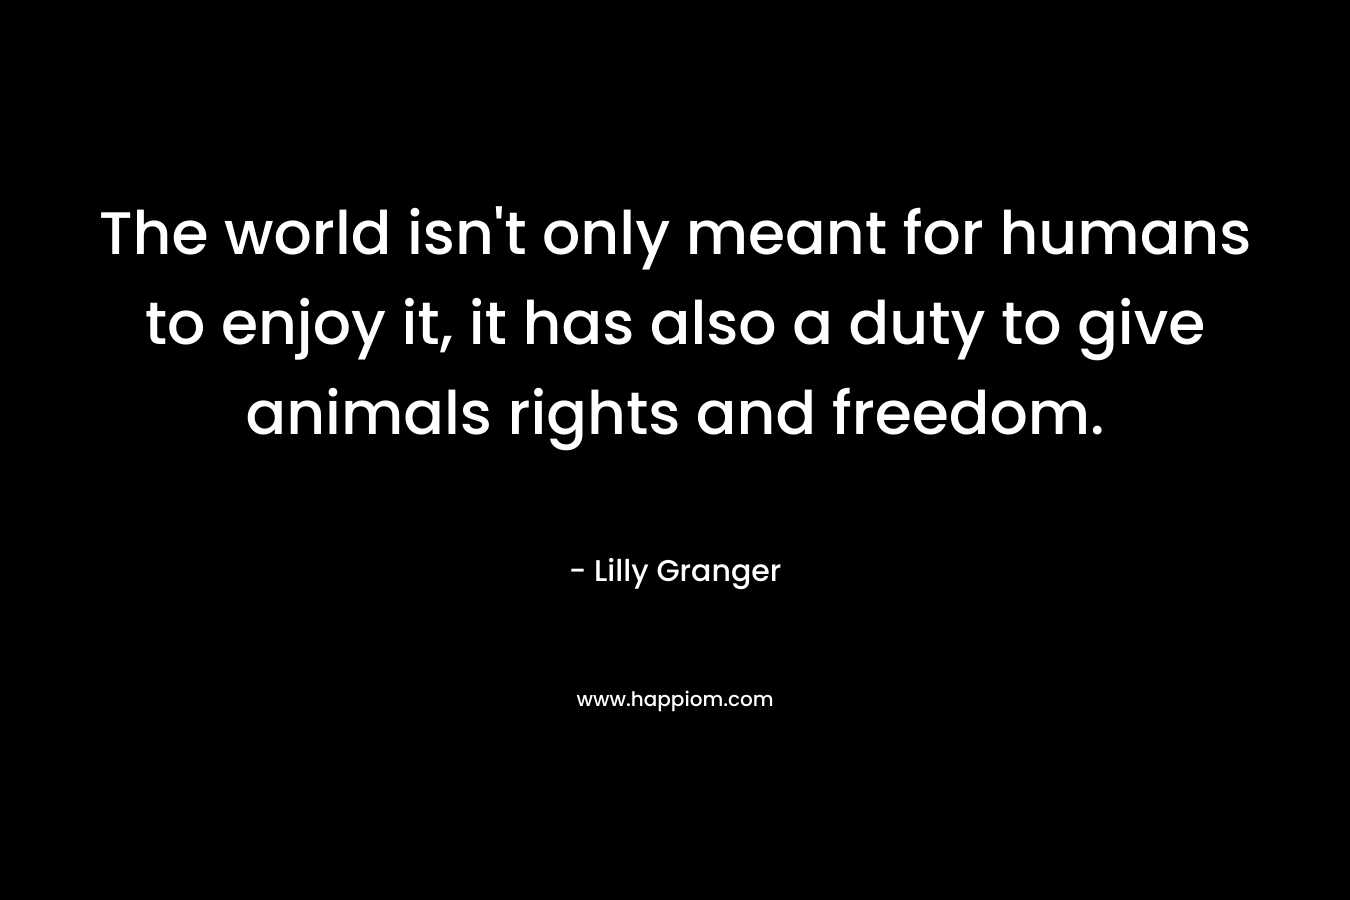 The world isn’t only meant for humans to enjoy it, it has also a duty to give animals rights and freedom. – Lilly Granger